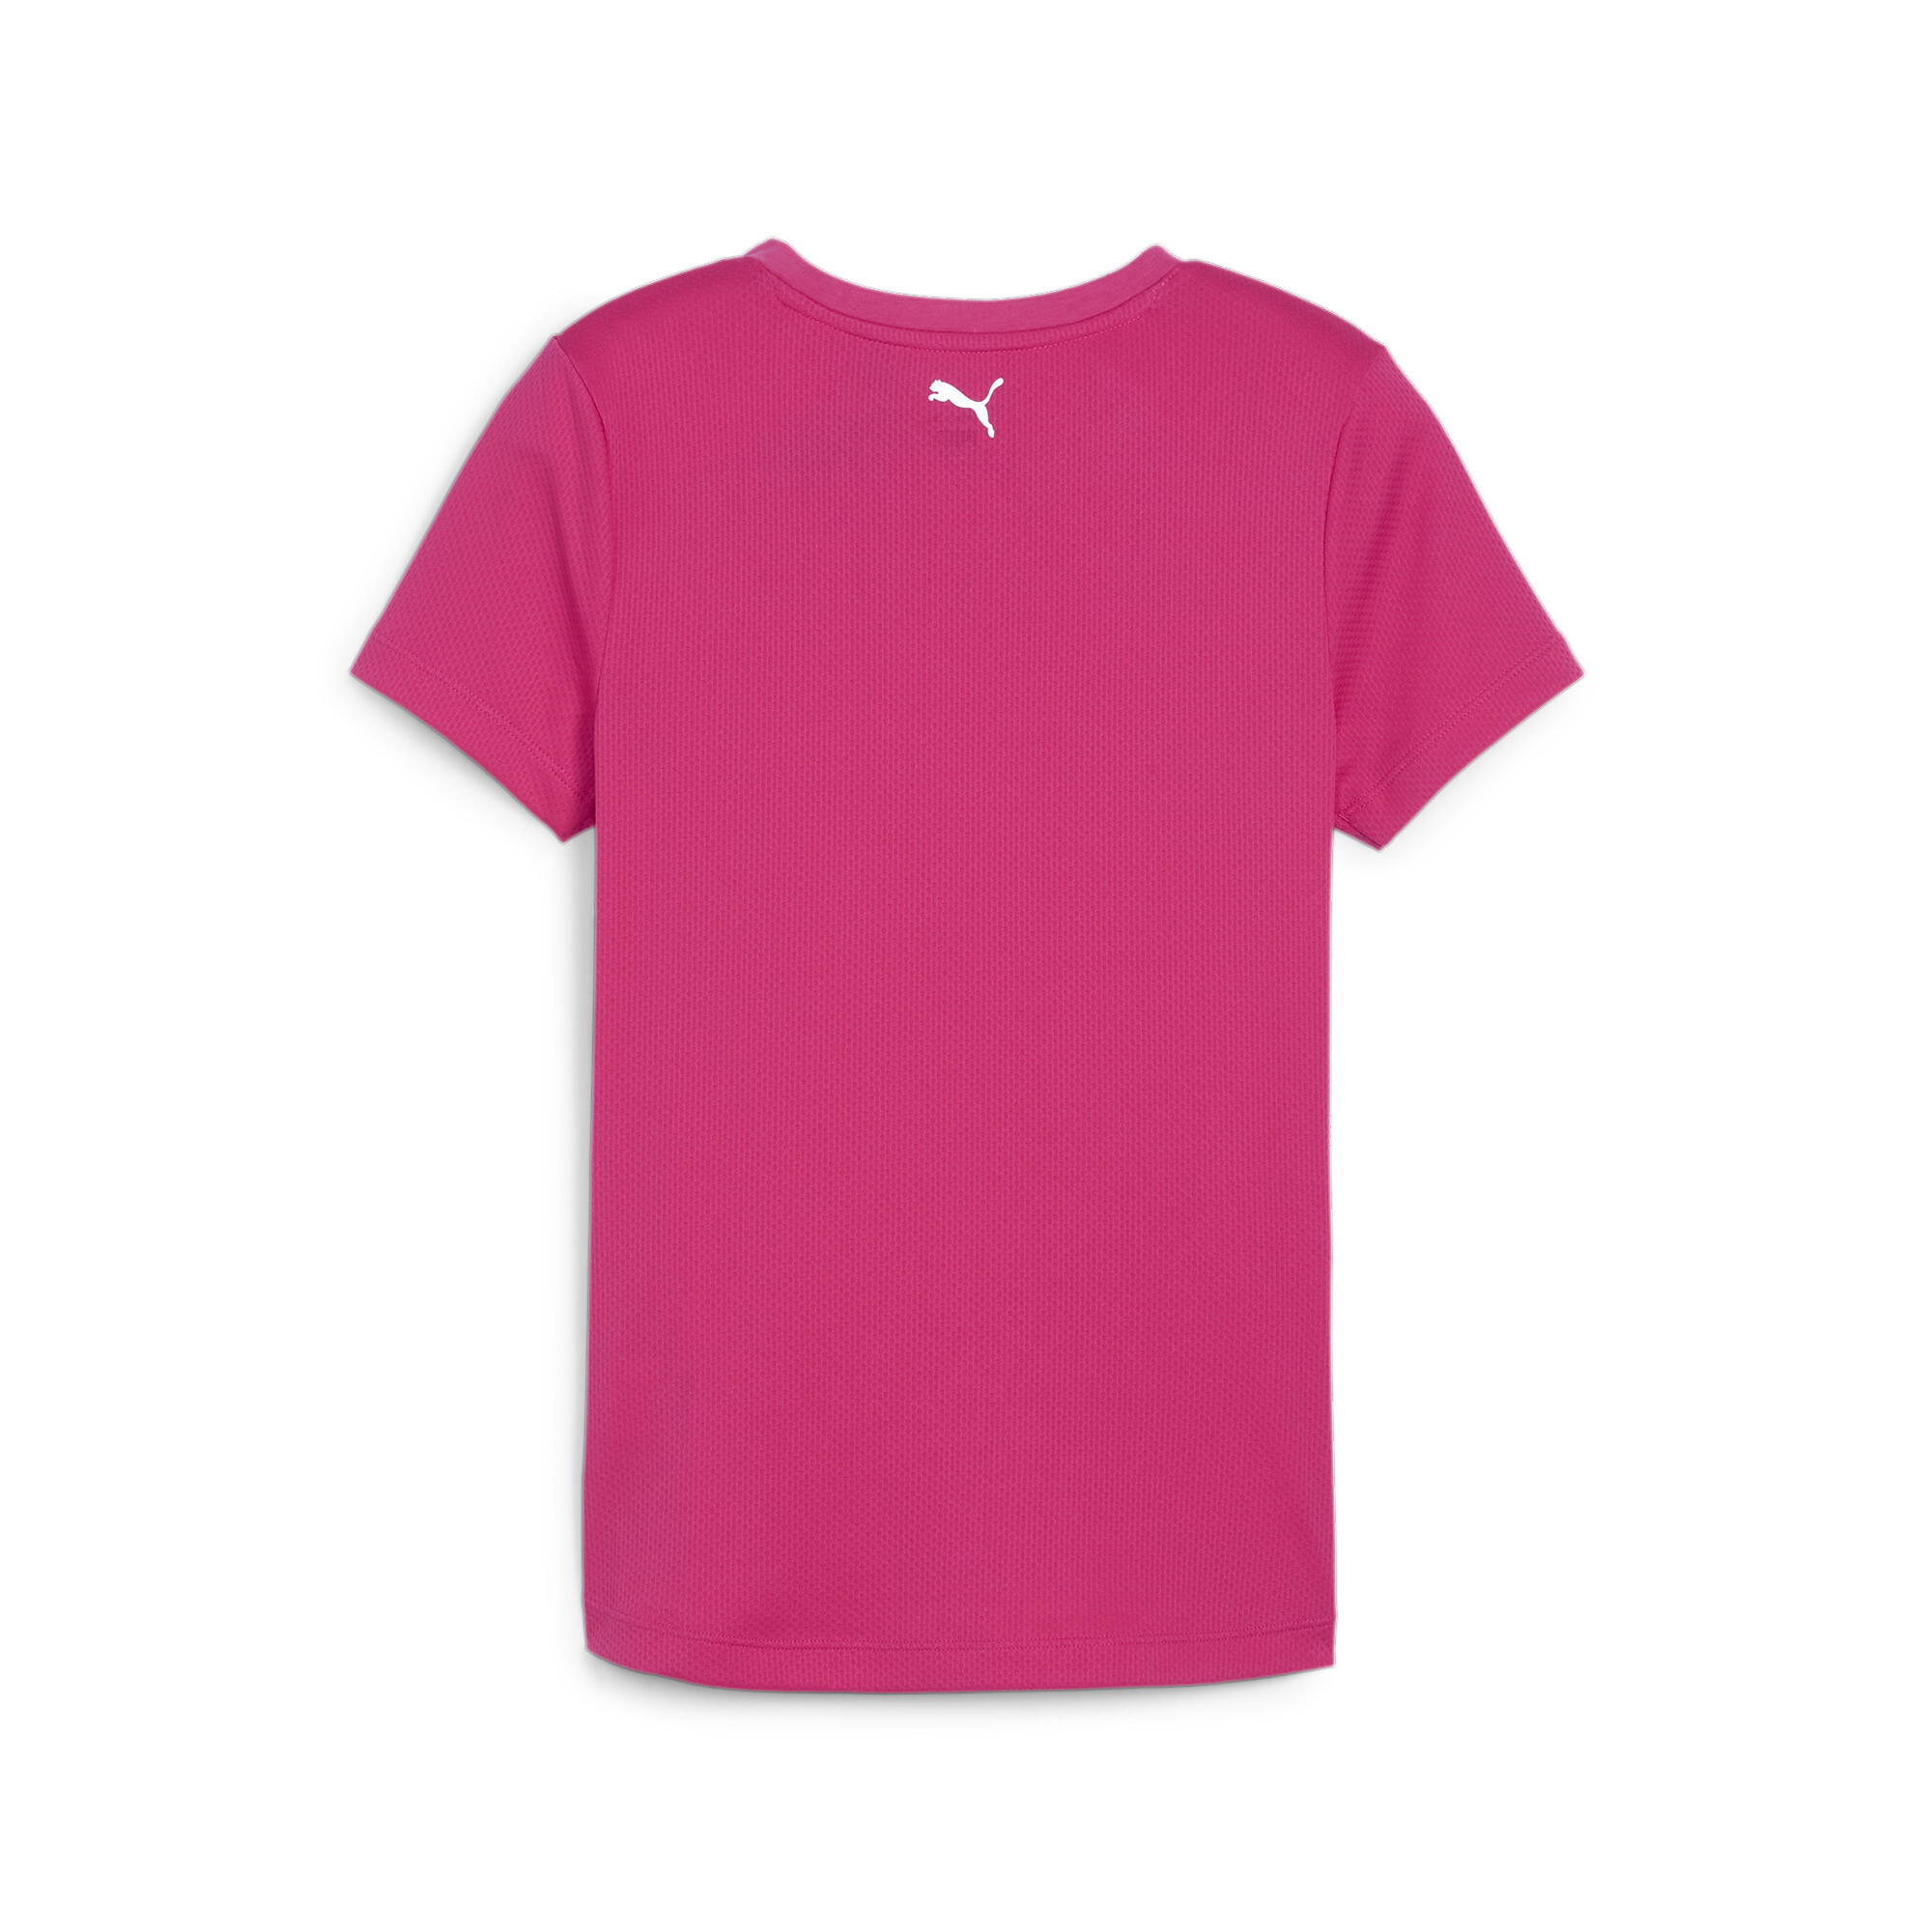 Women's Puma FIT Youth T-Shirt, Pink, Size 13-14Y, Shop